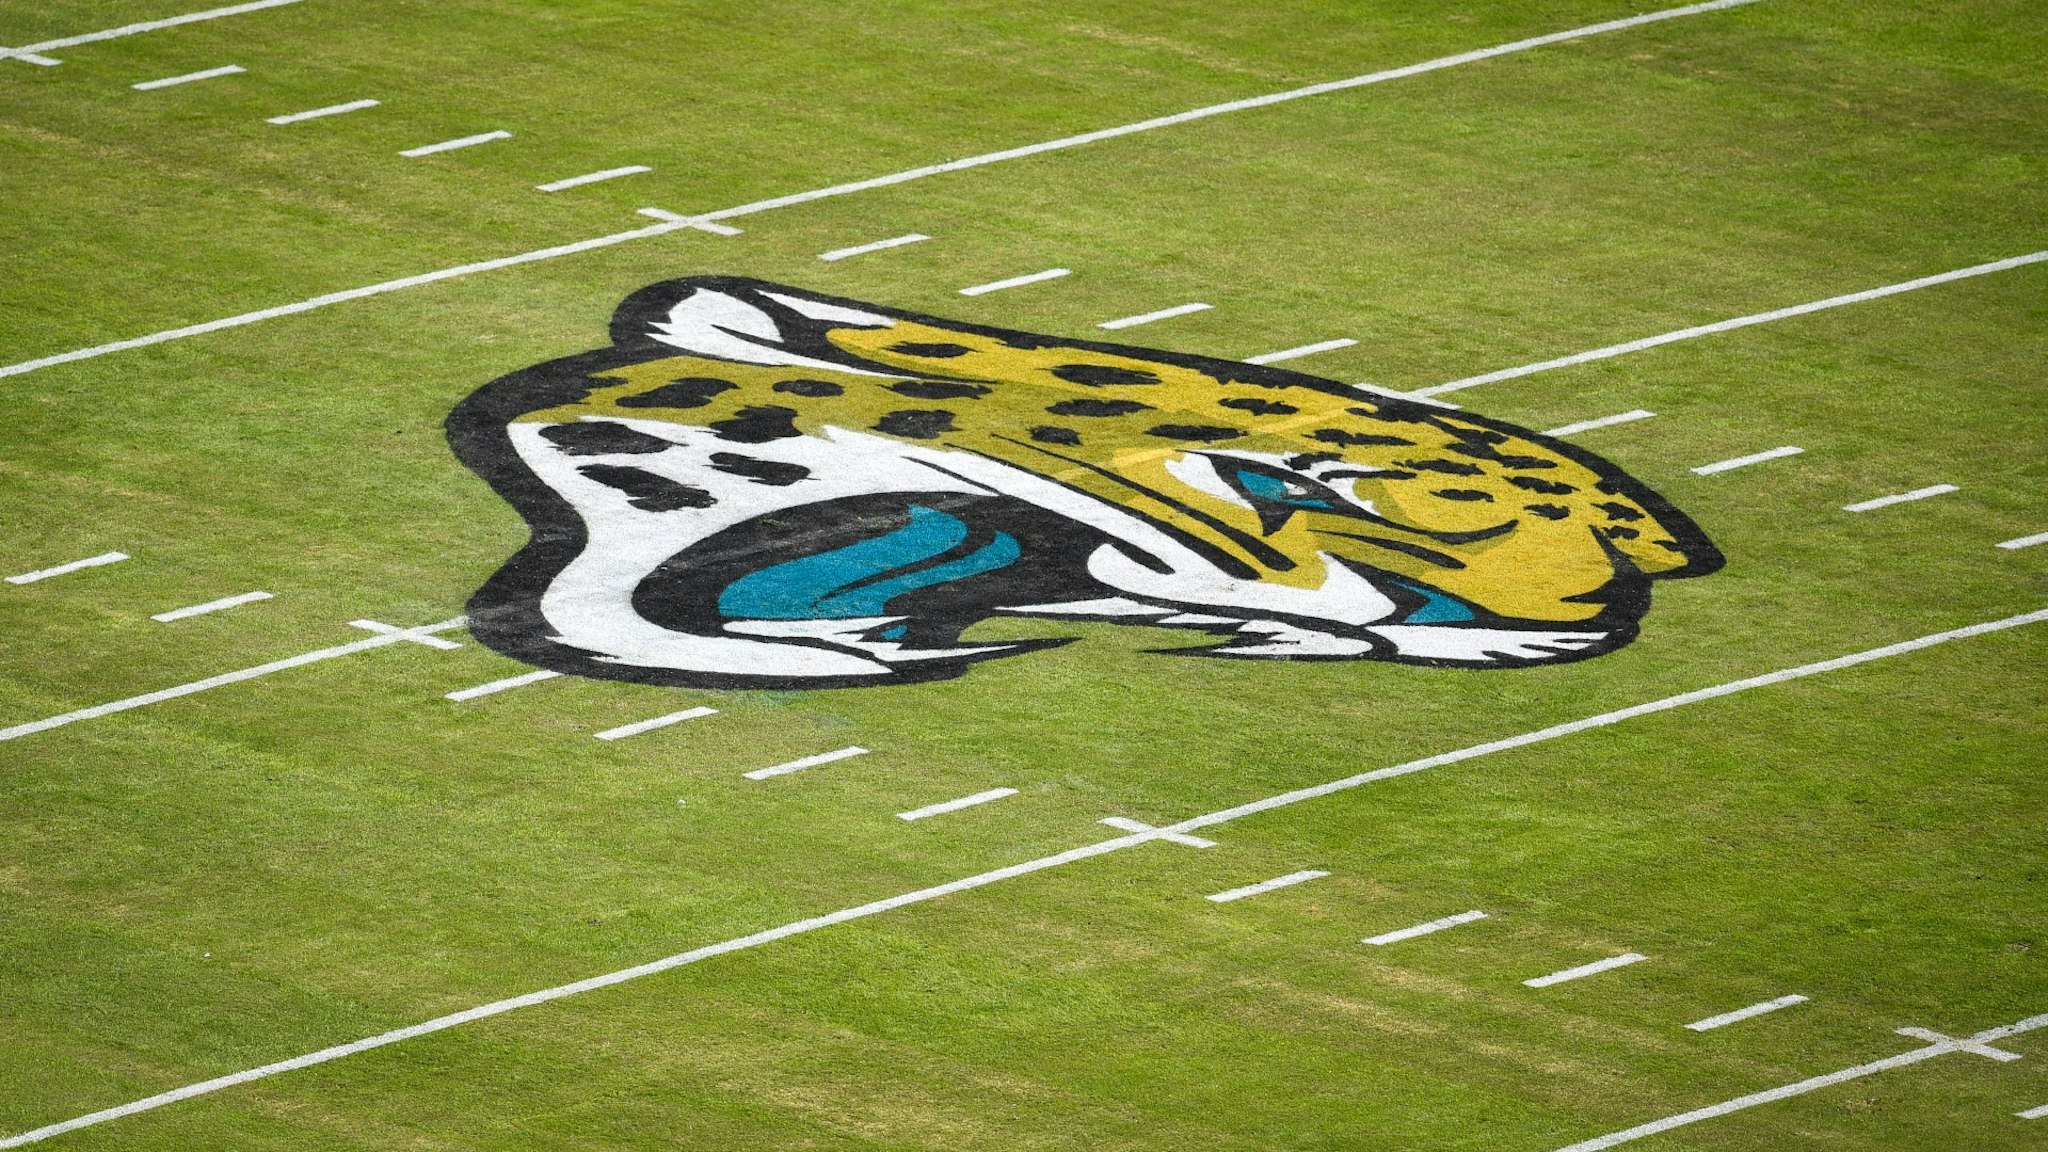 A general view of the Jaguars' logo prior to the first half of an NFL game between the Pittsburgh Steelers and the Jacksonville Jaguars on November 18, 2018, at TIAA Bank Field.